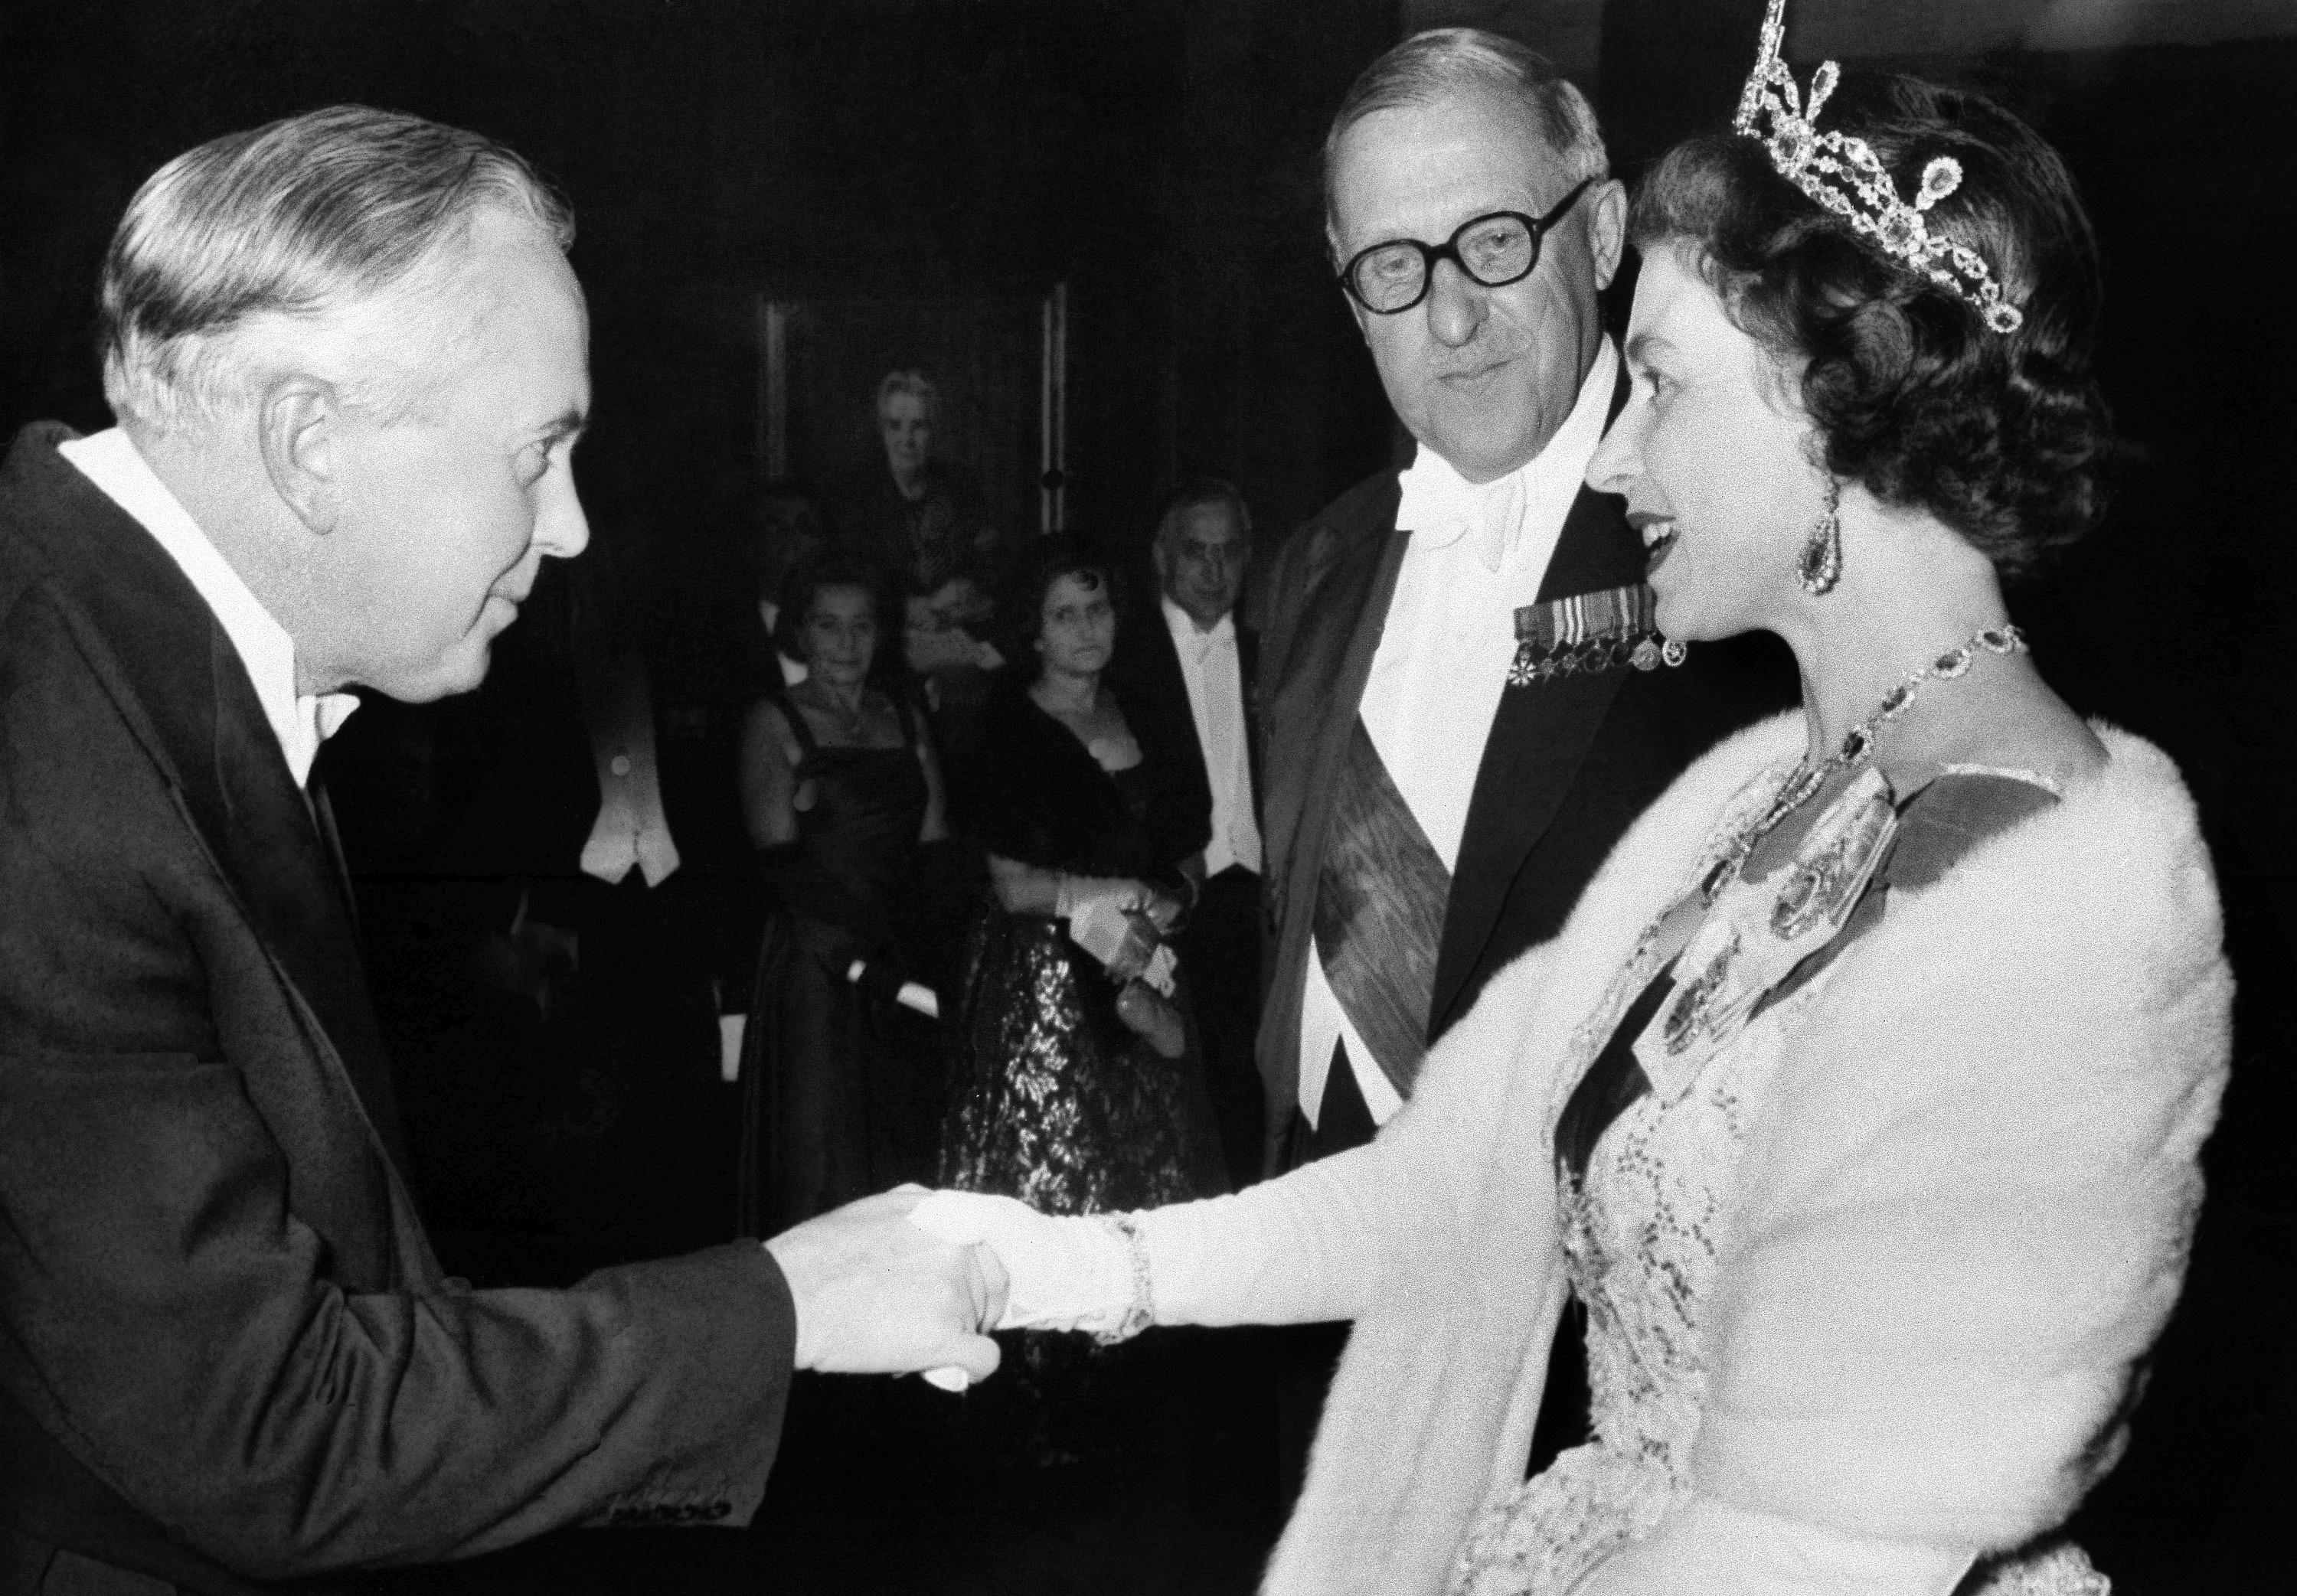 The prime ministers who served under Queen Elizabeth II